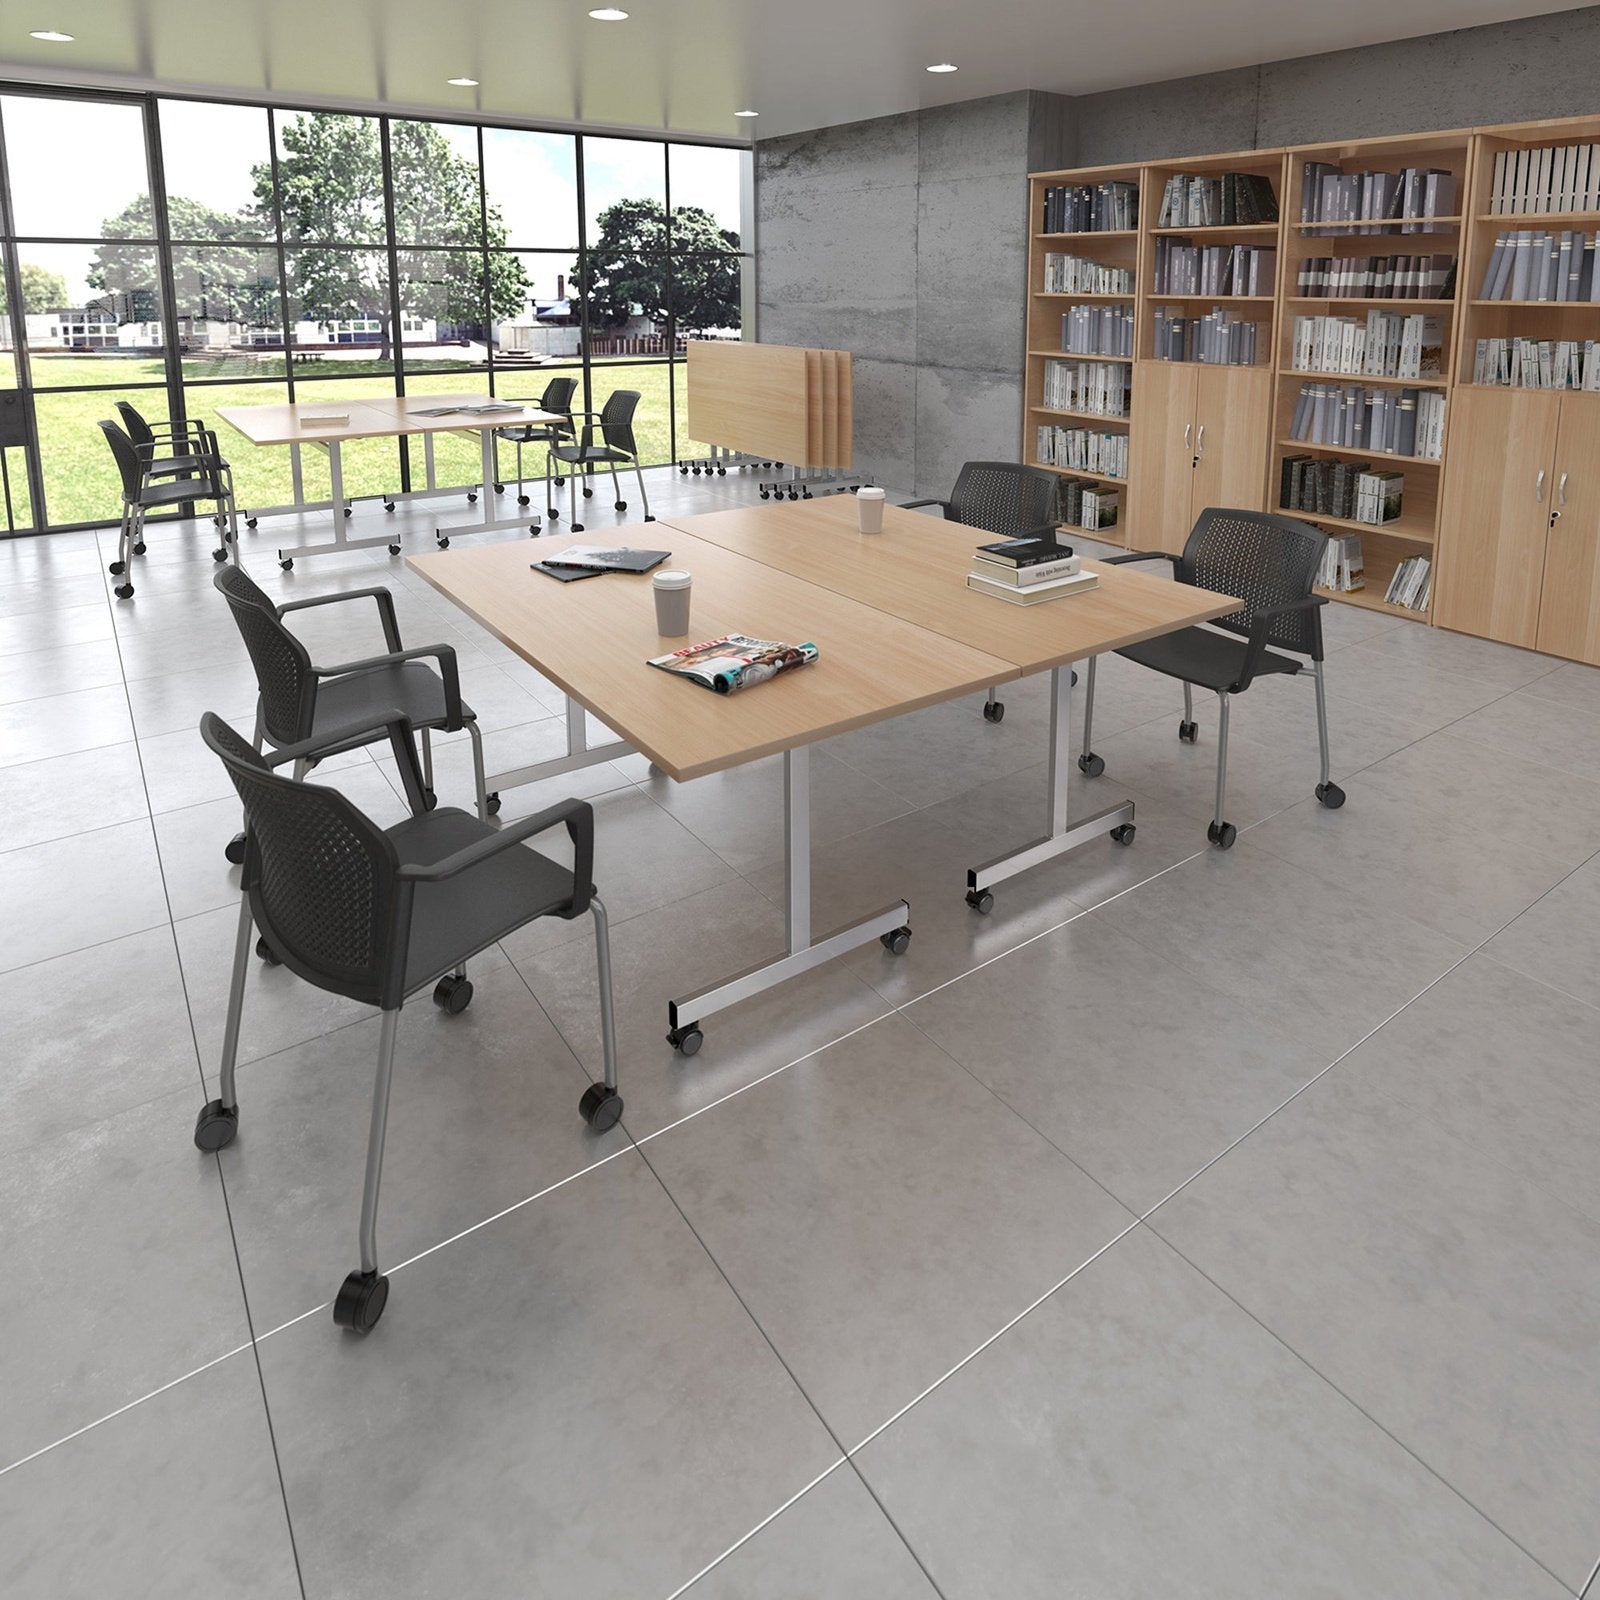 Rectangular fliptop meeting table with silver frame - Office Products Online